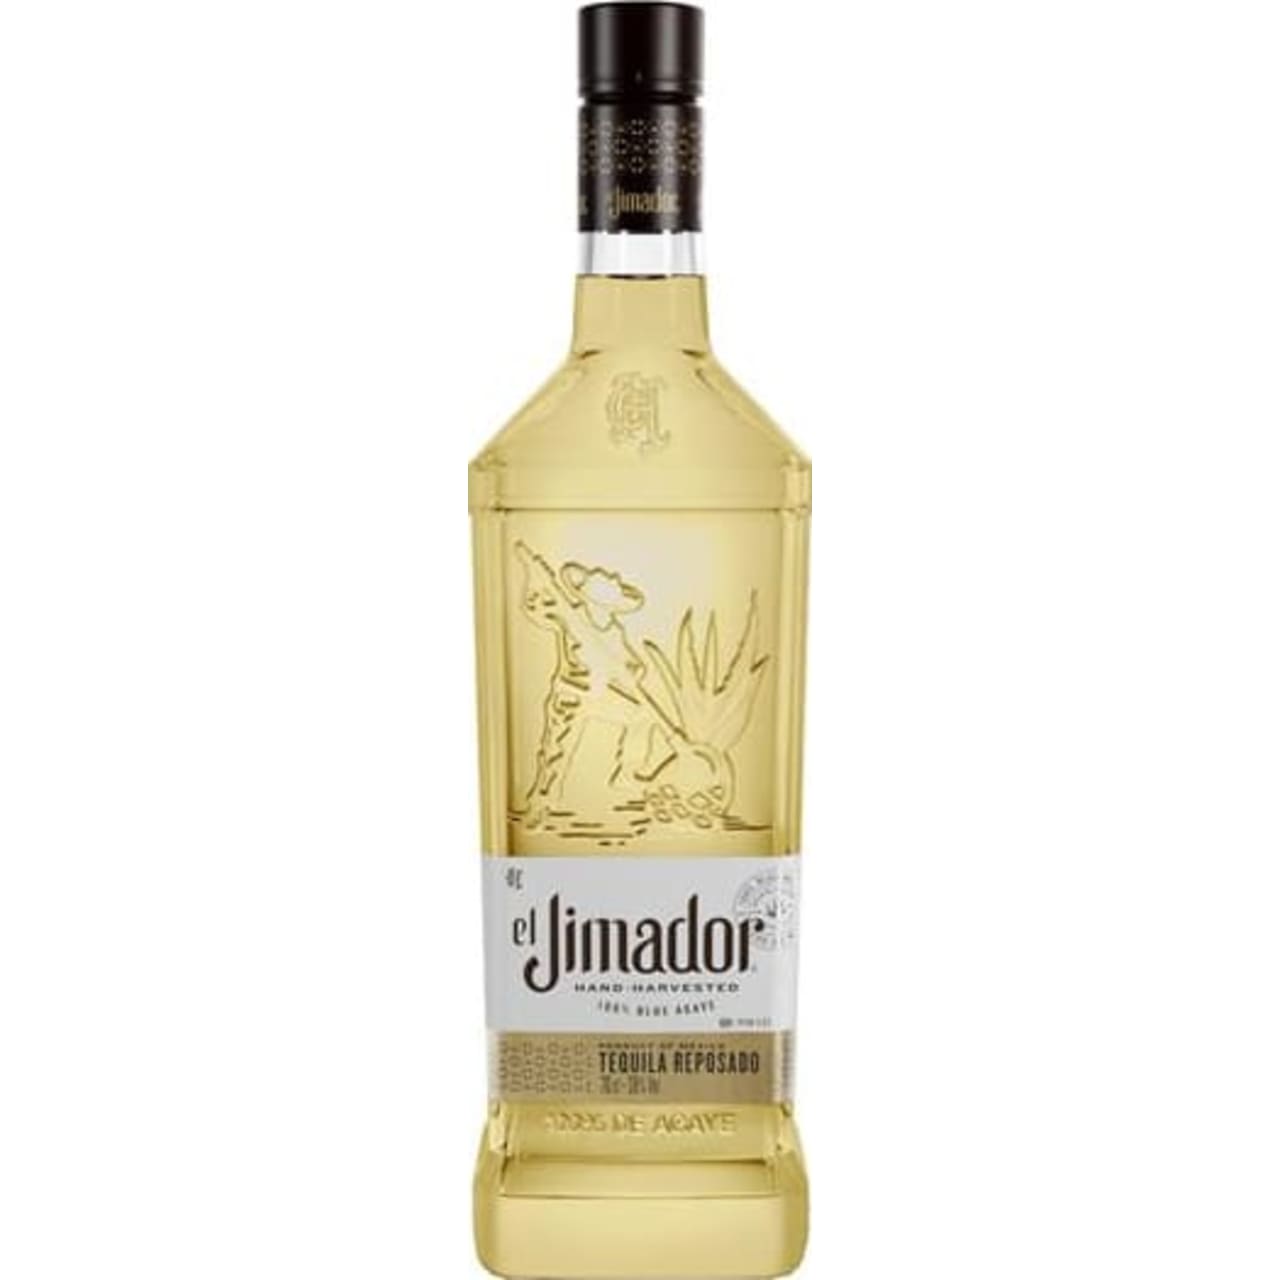 El Jimador Reposado begins with 100% hand-harvested blue Weber agave, naturally fermented and double distilled. Then it enjoys a two-month siesta in their own handmade American oak barrels until the perfect moment.